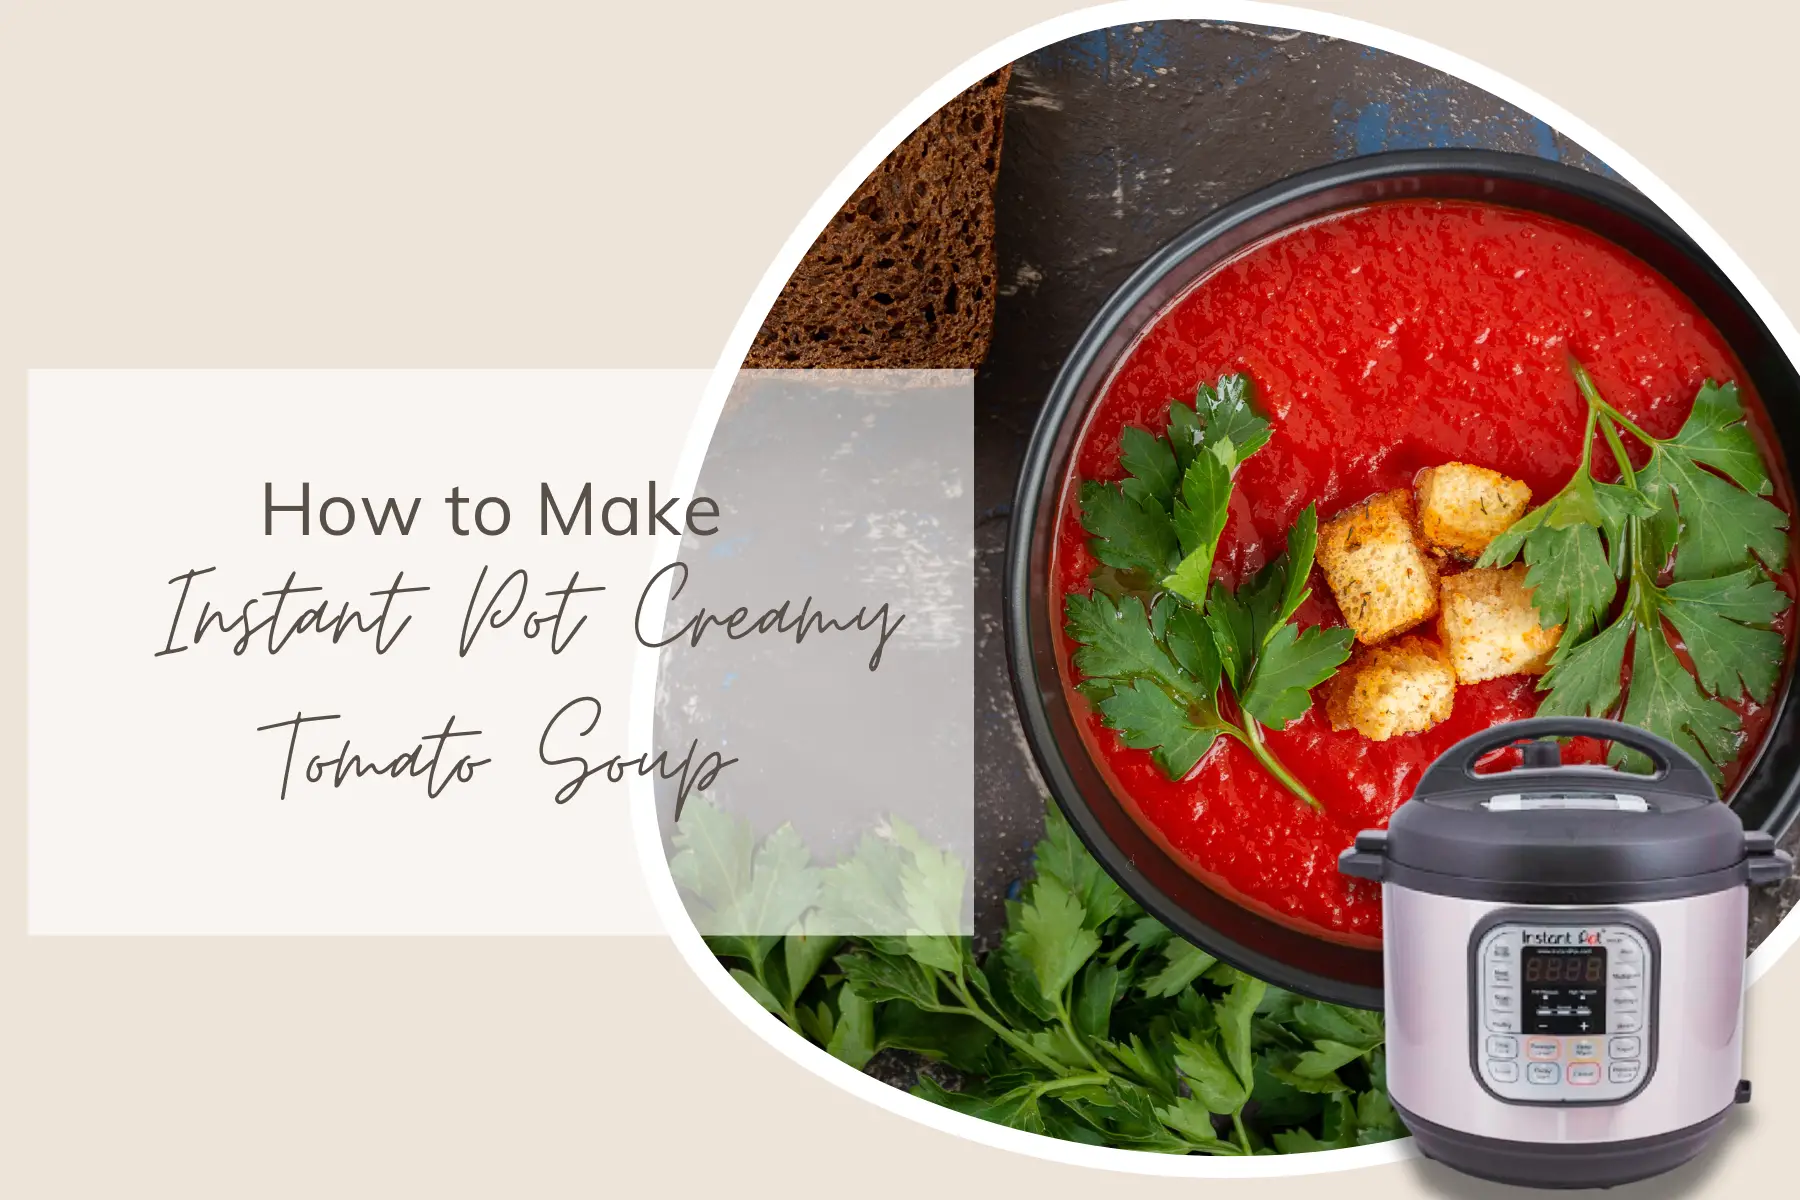 How to Make Instant Pot Creamy Tomato Soup